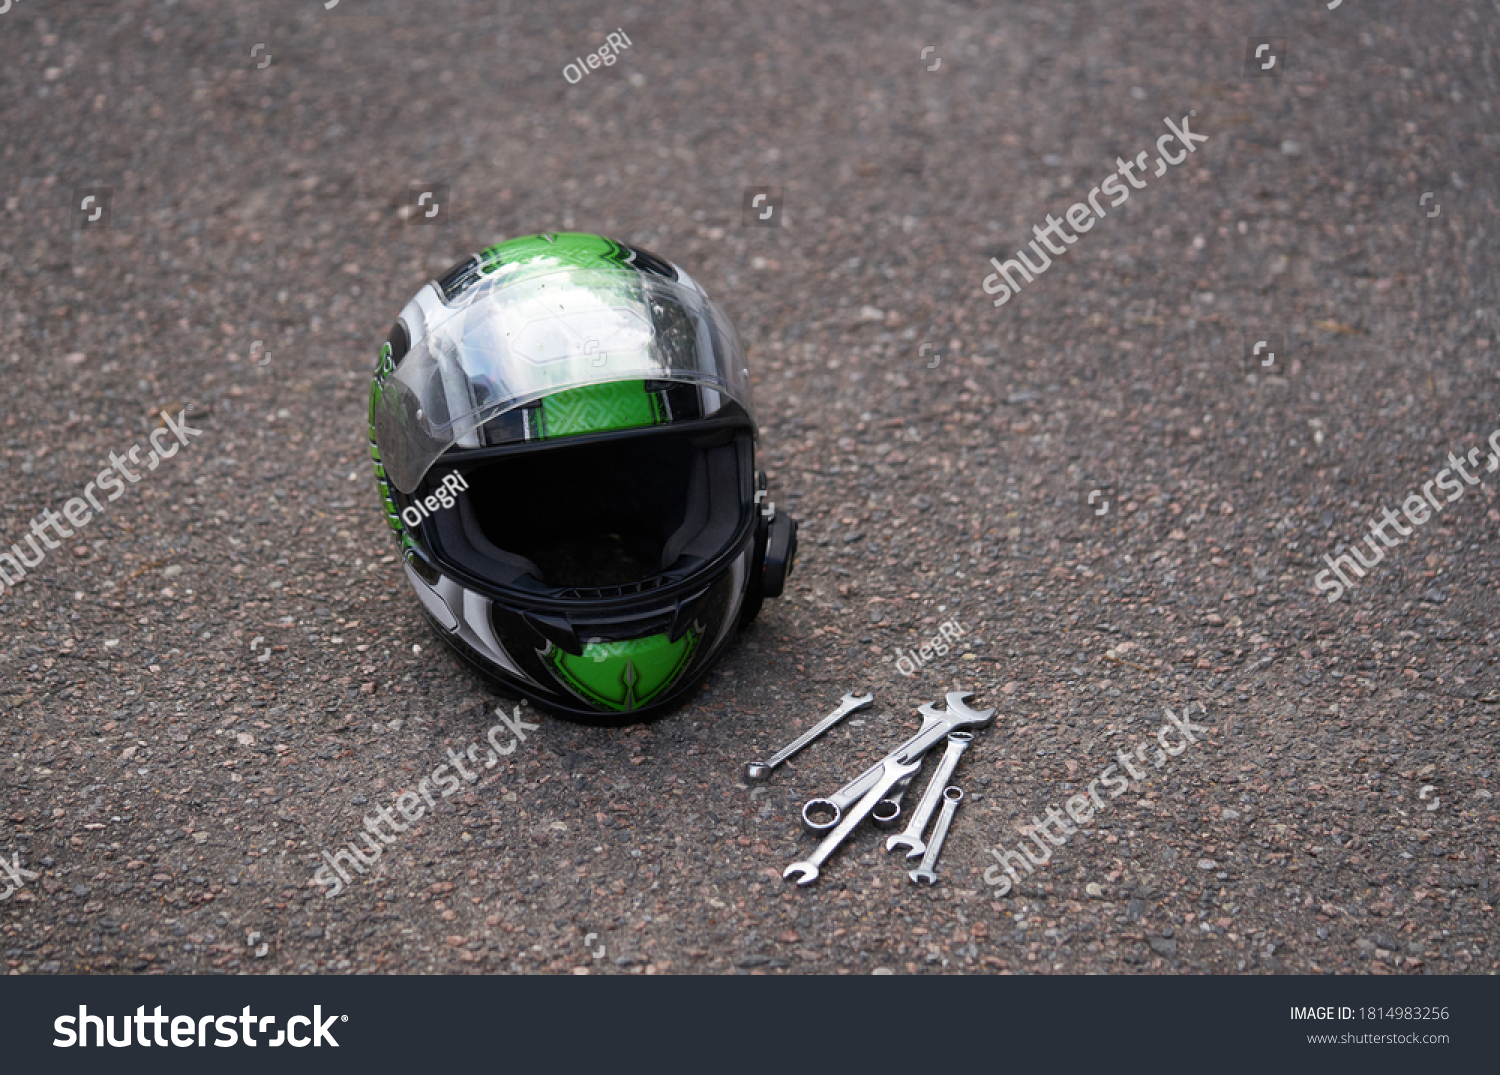 Motorcycle helmet at ground and some wrenches. Wrench at ground #1814983256